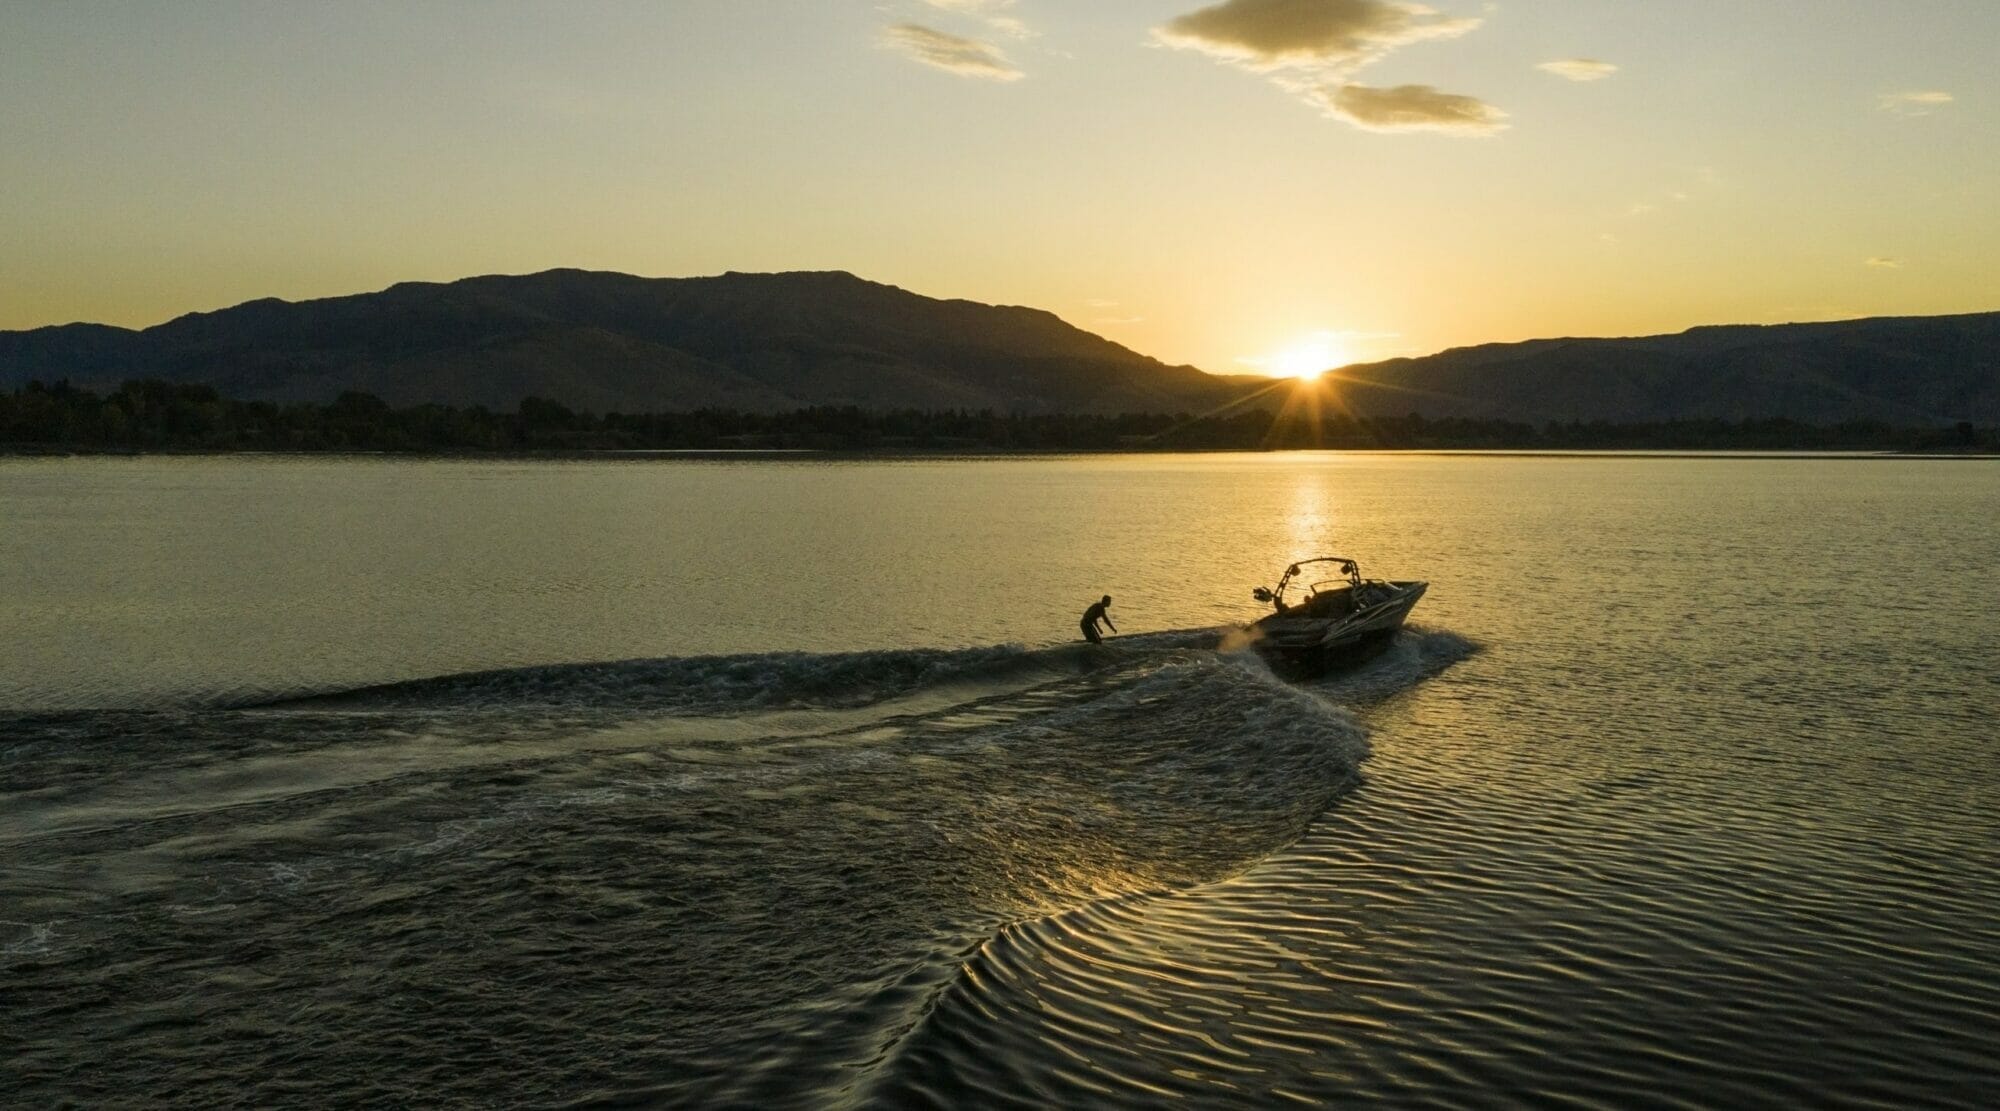 A man is riding a Supreme boat on a lake at sunset.